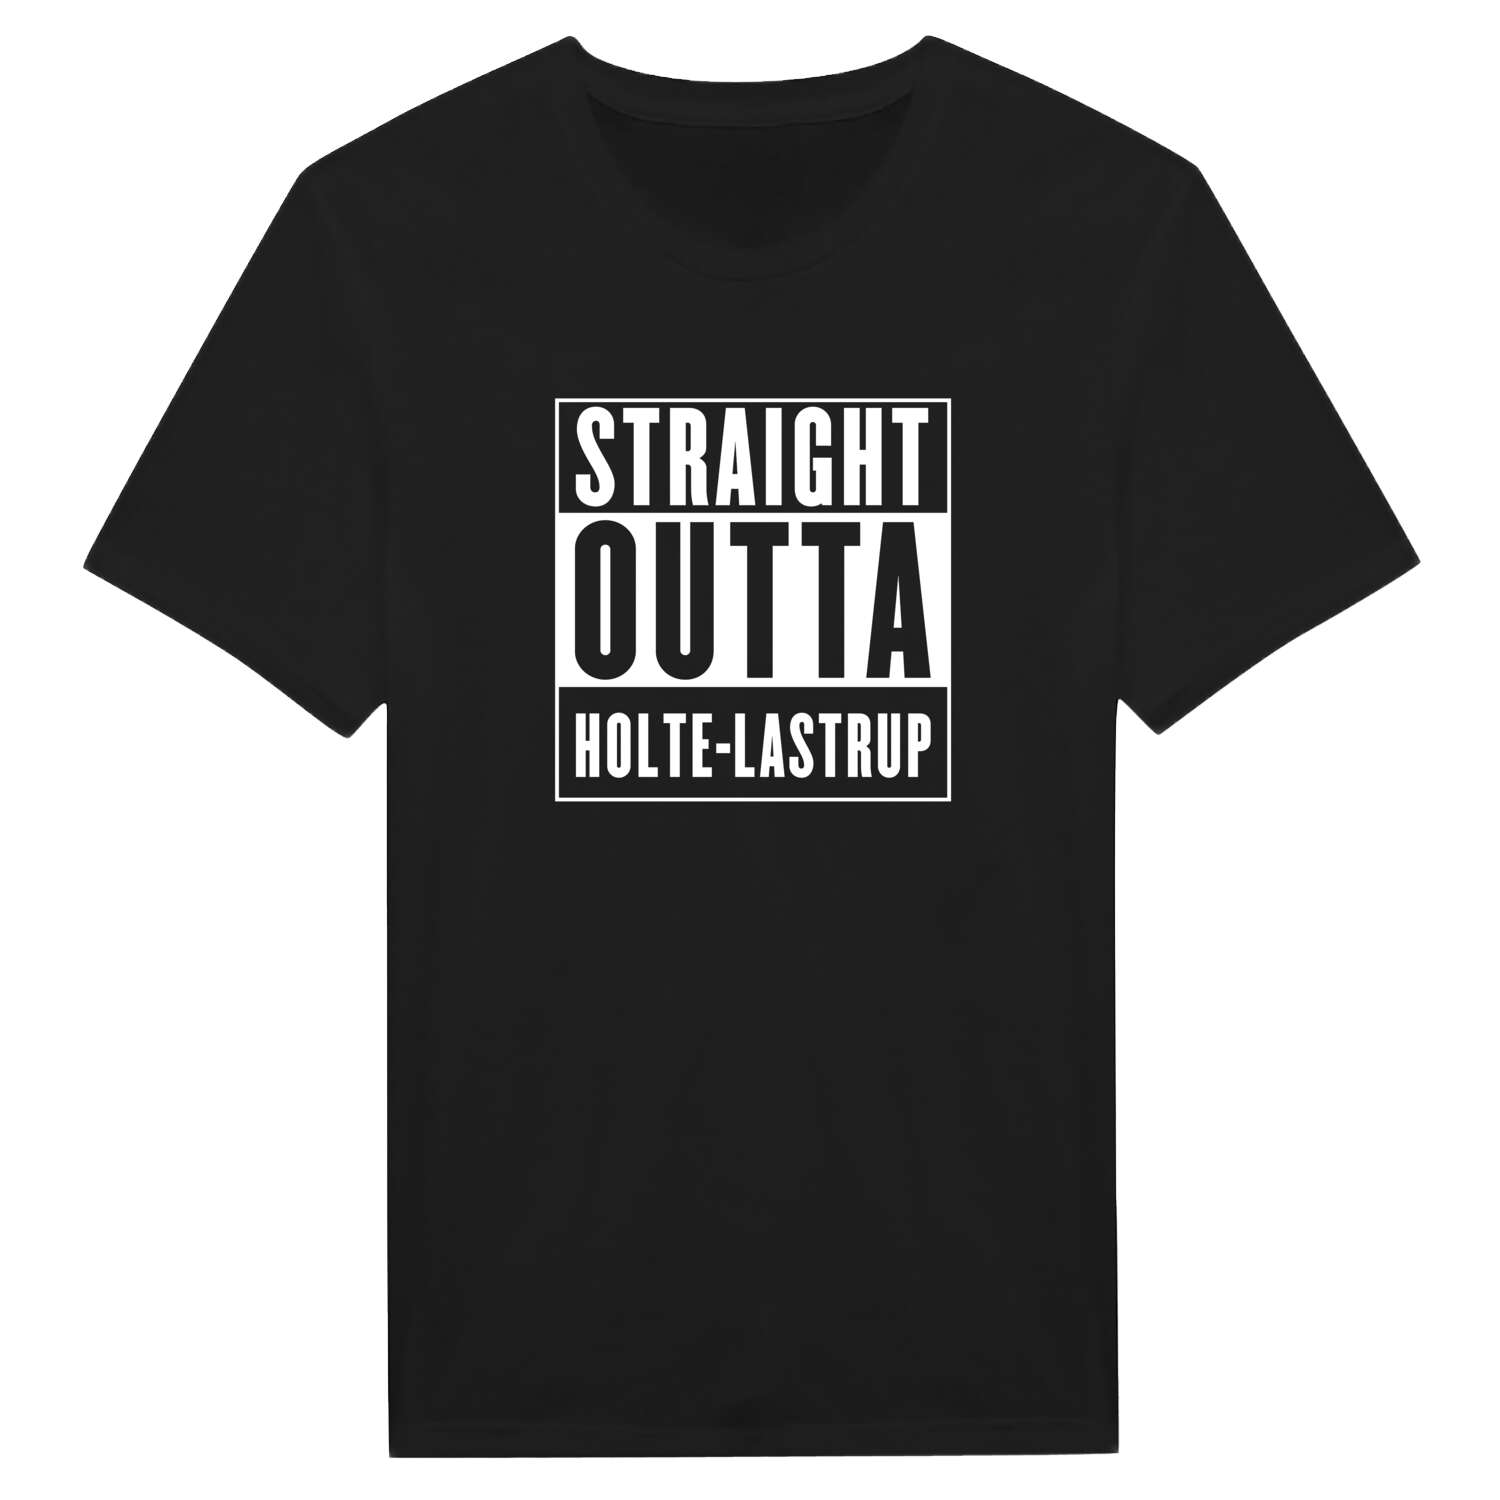 Holte-Lastrup T-Shirt »Straight Outta«